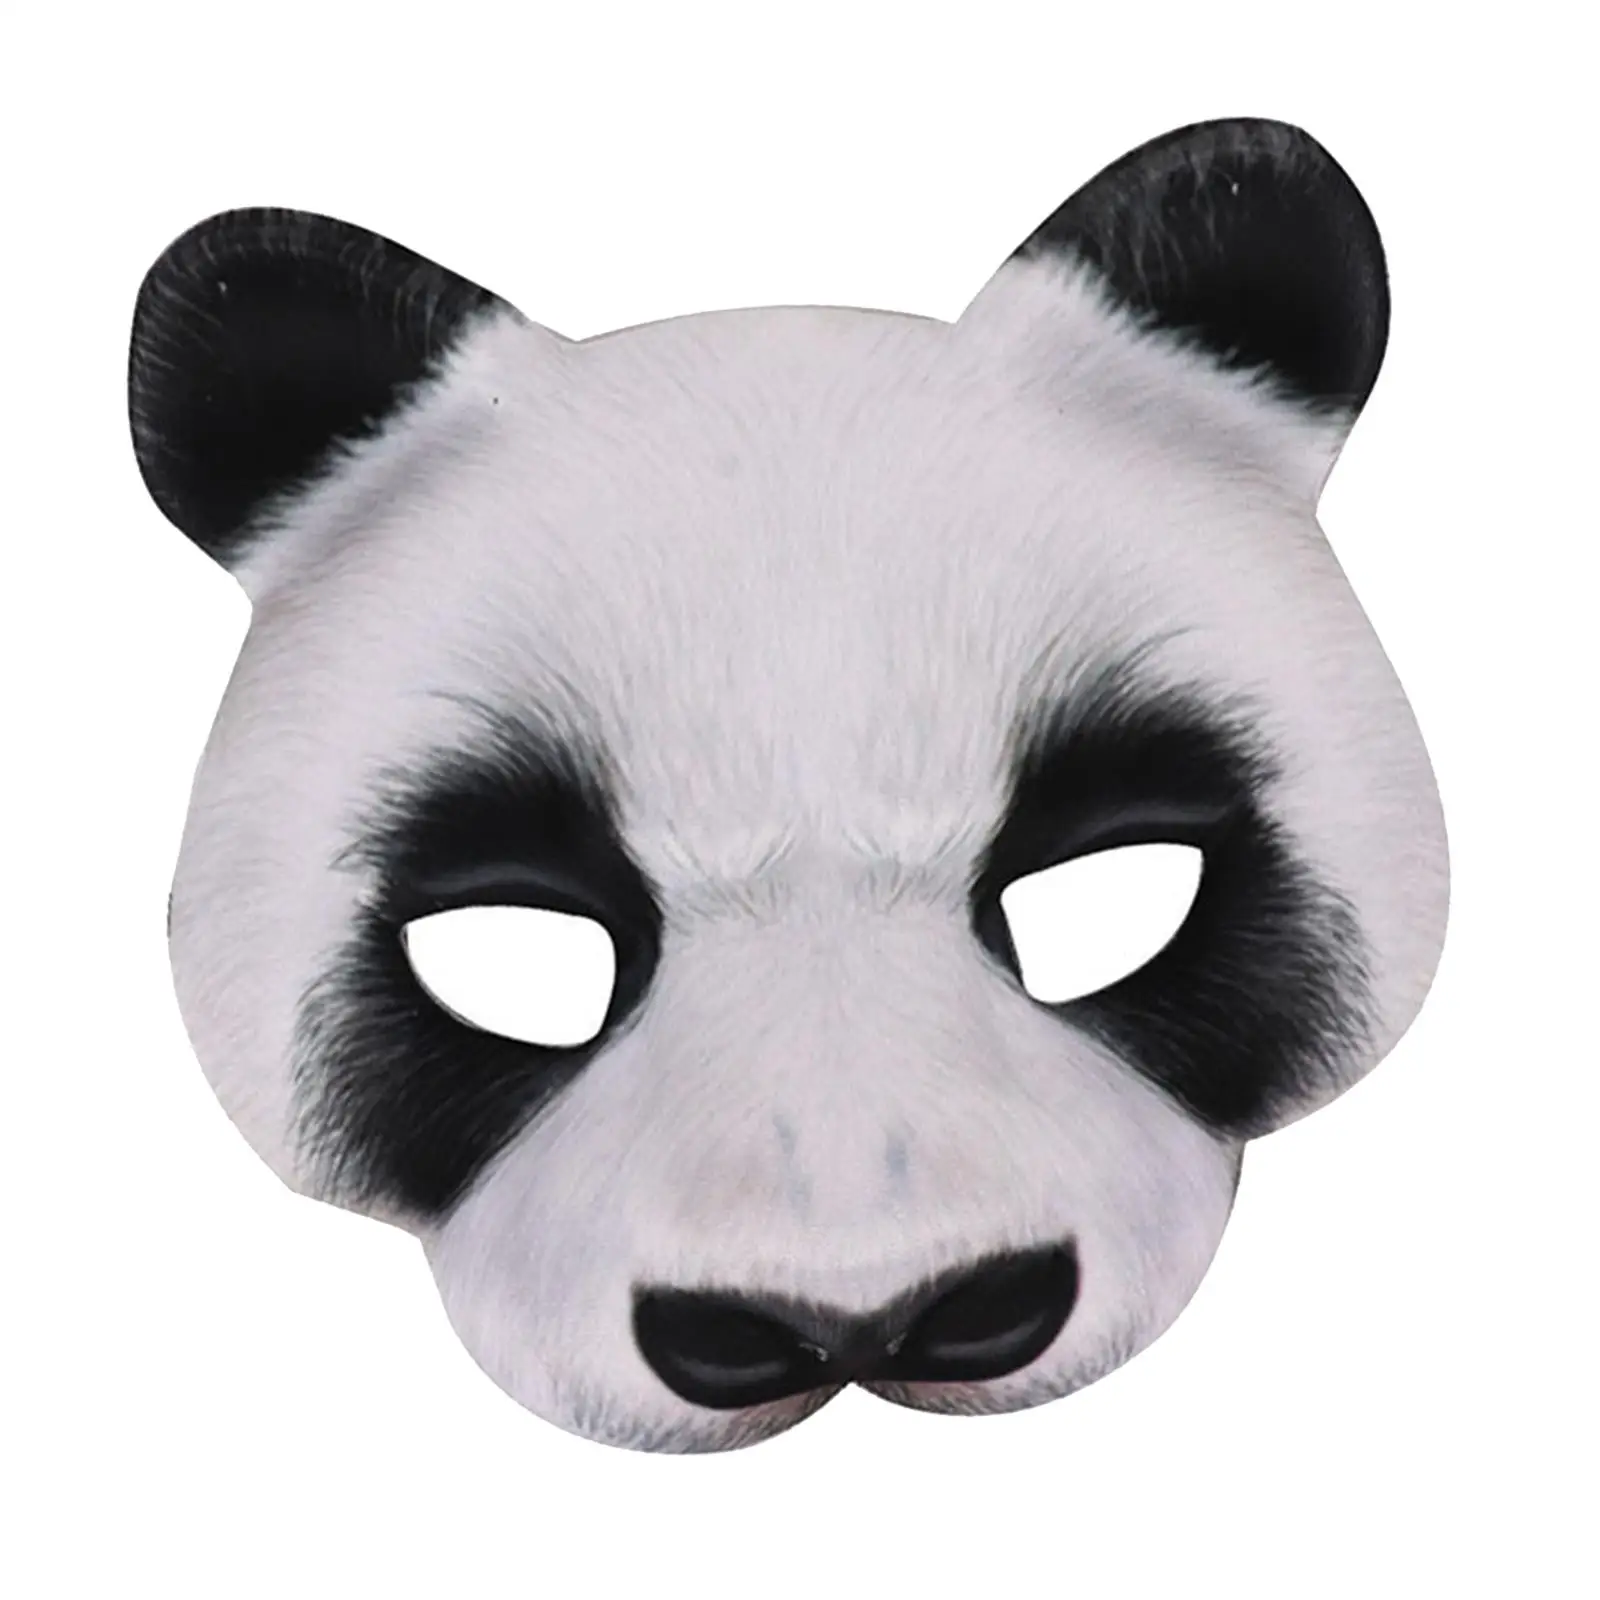 Panda Masks Cosplay Headgear Animal Mask with Elastic Band Clothes Decor Half Face Mask for Adults Men Women Halloween Prom